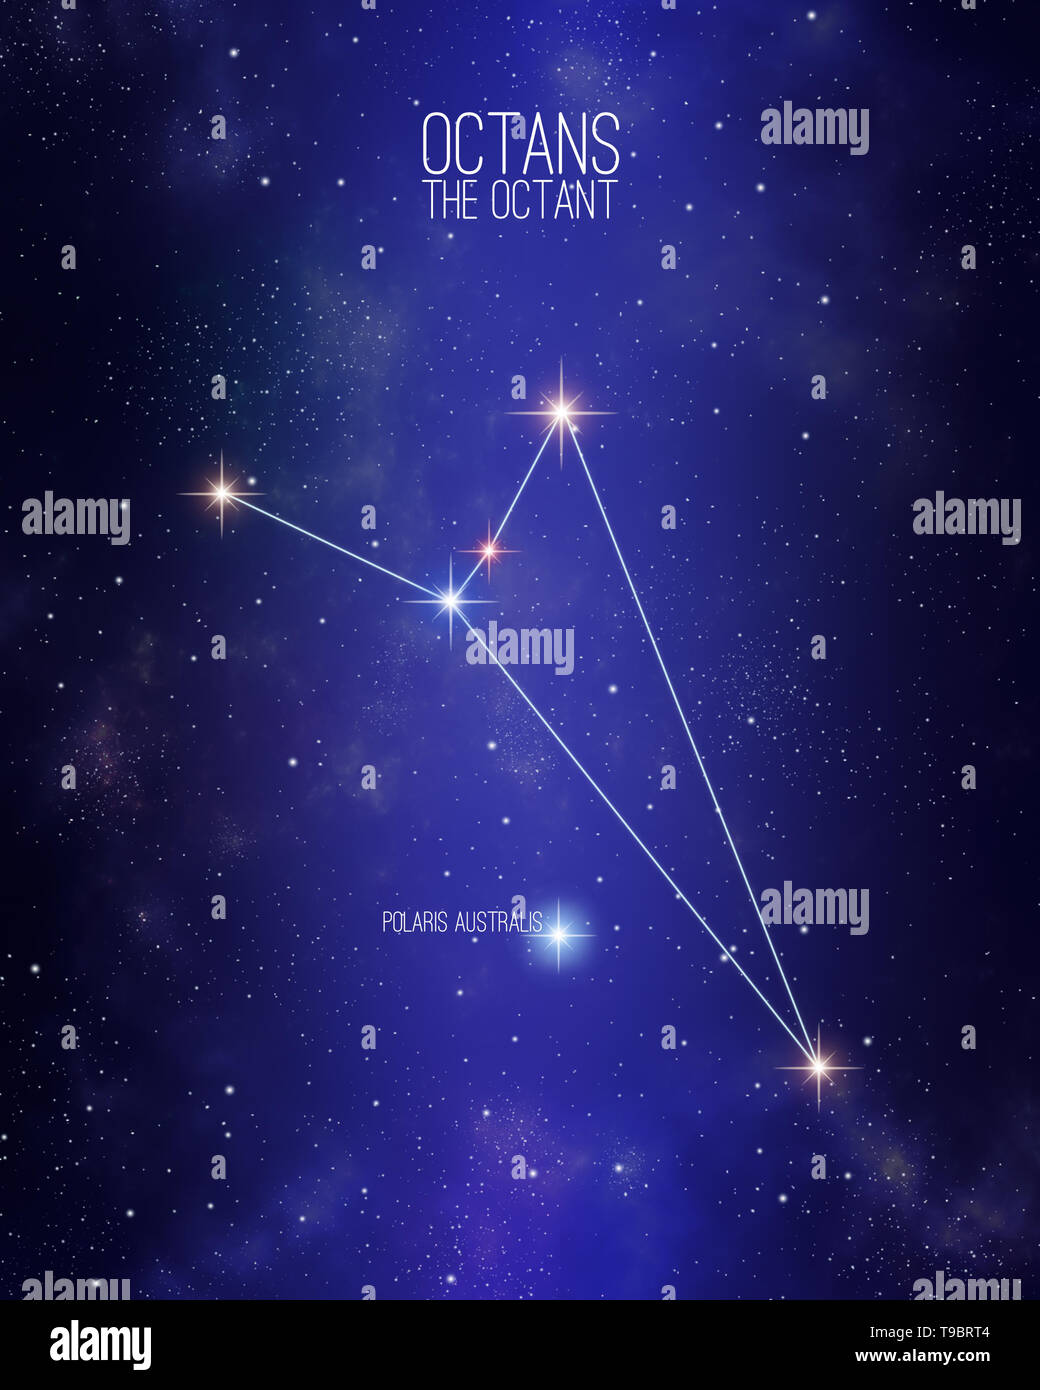 Octans the octant constellation map on a starry space background. Stars relative sizes and color shades based on their spectral type. Stock Photo